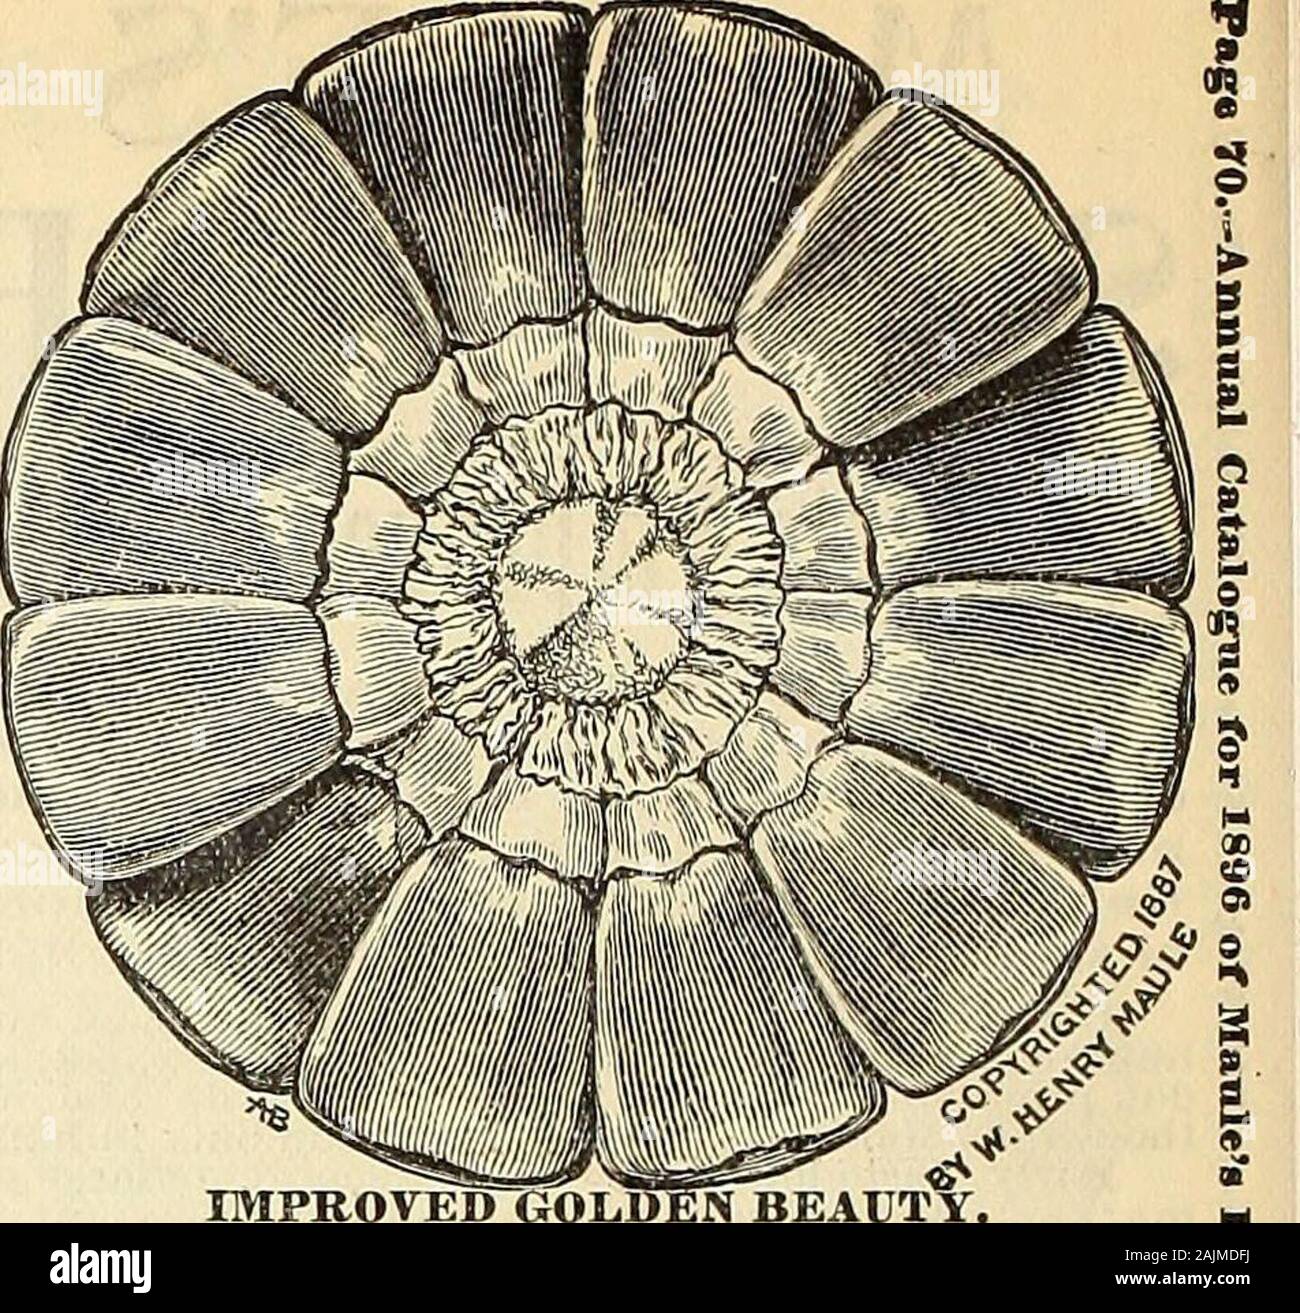 Maule's seed catalogue : 1896 . completelyto the extreme end of the cob. THECOBS ARE UWUSUALiLY SMALL;when broken in half the grains vrillalways reach across. The illustrationis an exact representation of half an ear.The richness of color and fine quaUty ofgrain make it very superior tor grindinginto meal. The grains are not of a hard,flinty type, neither are they so soft as to begreatly shriveled, as is the Golden Dent.The ears are easily shelled, although thekernels are firm on the ear, and in everyrespect presents as perfect a type ascould be desired. The stalk takes astrong hold in the gfo Stock Photo